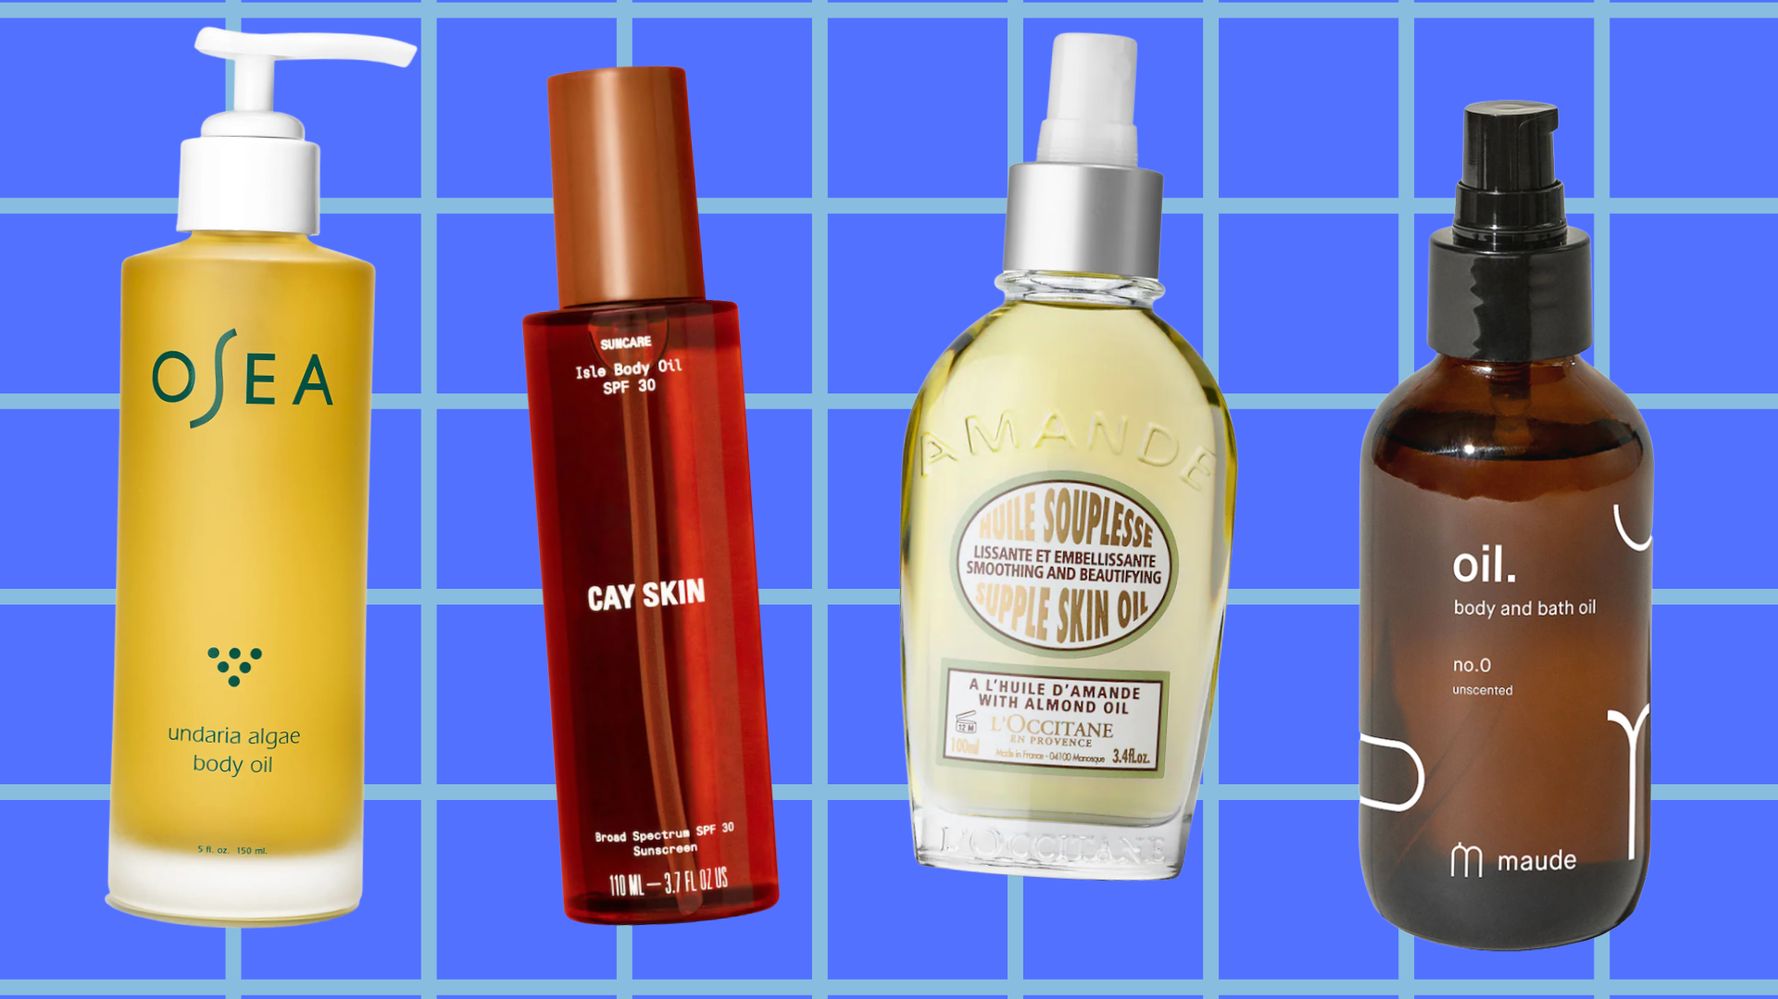 The best body oil for any skin type